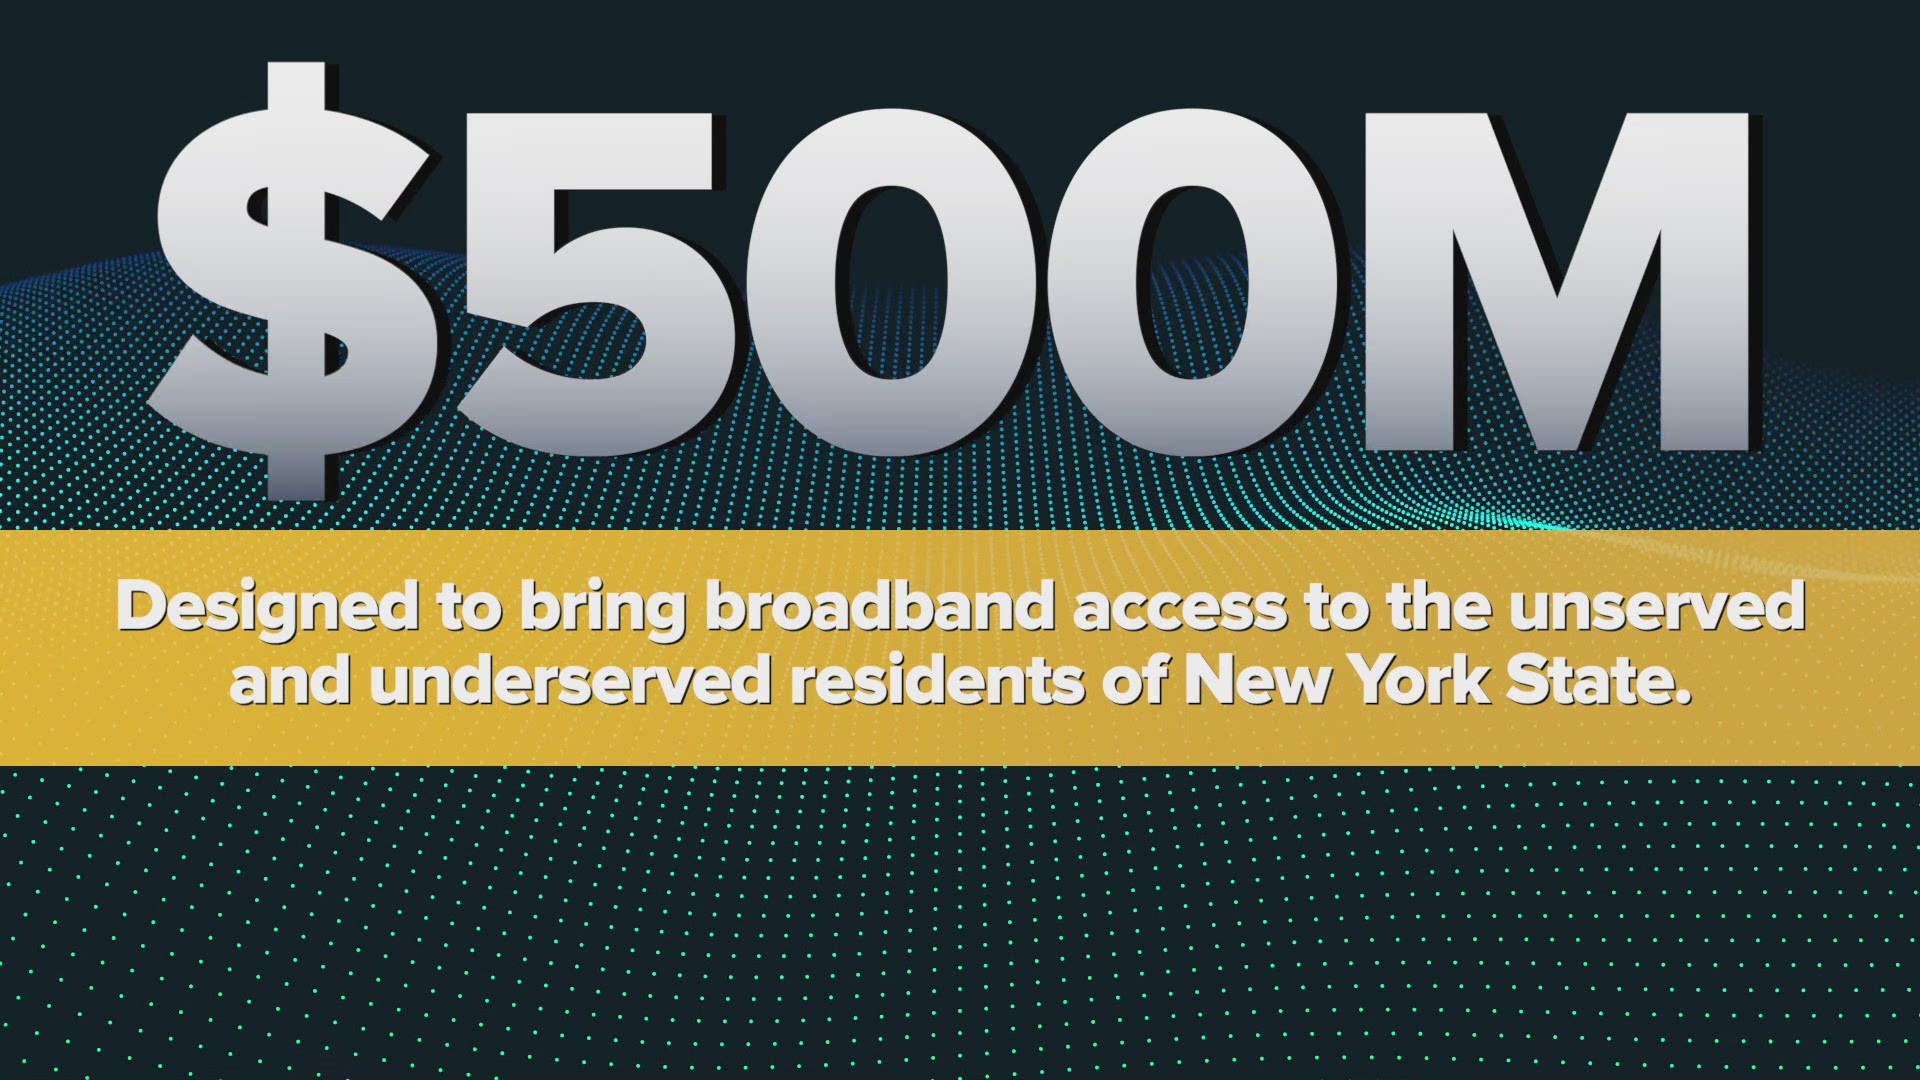 Armstrong Communications received more than $83M from New York State to build out broadband service in the Southern Tier of NY. It's 14 months overdue.